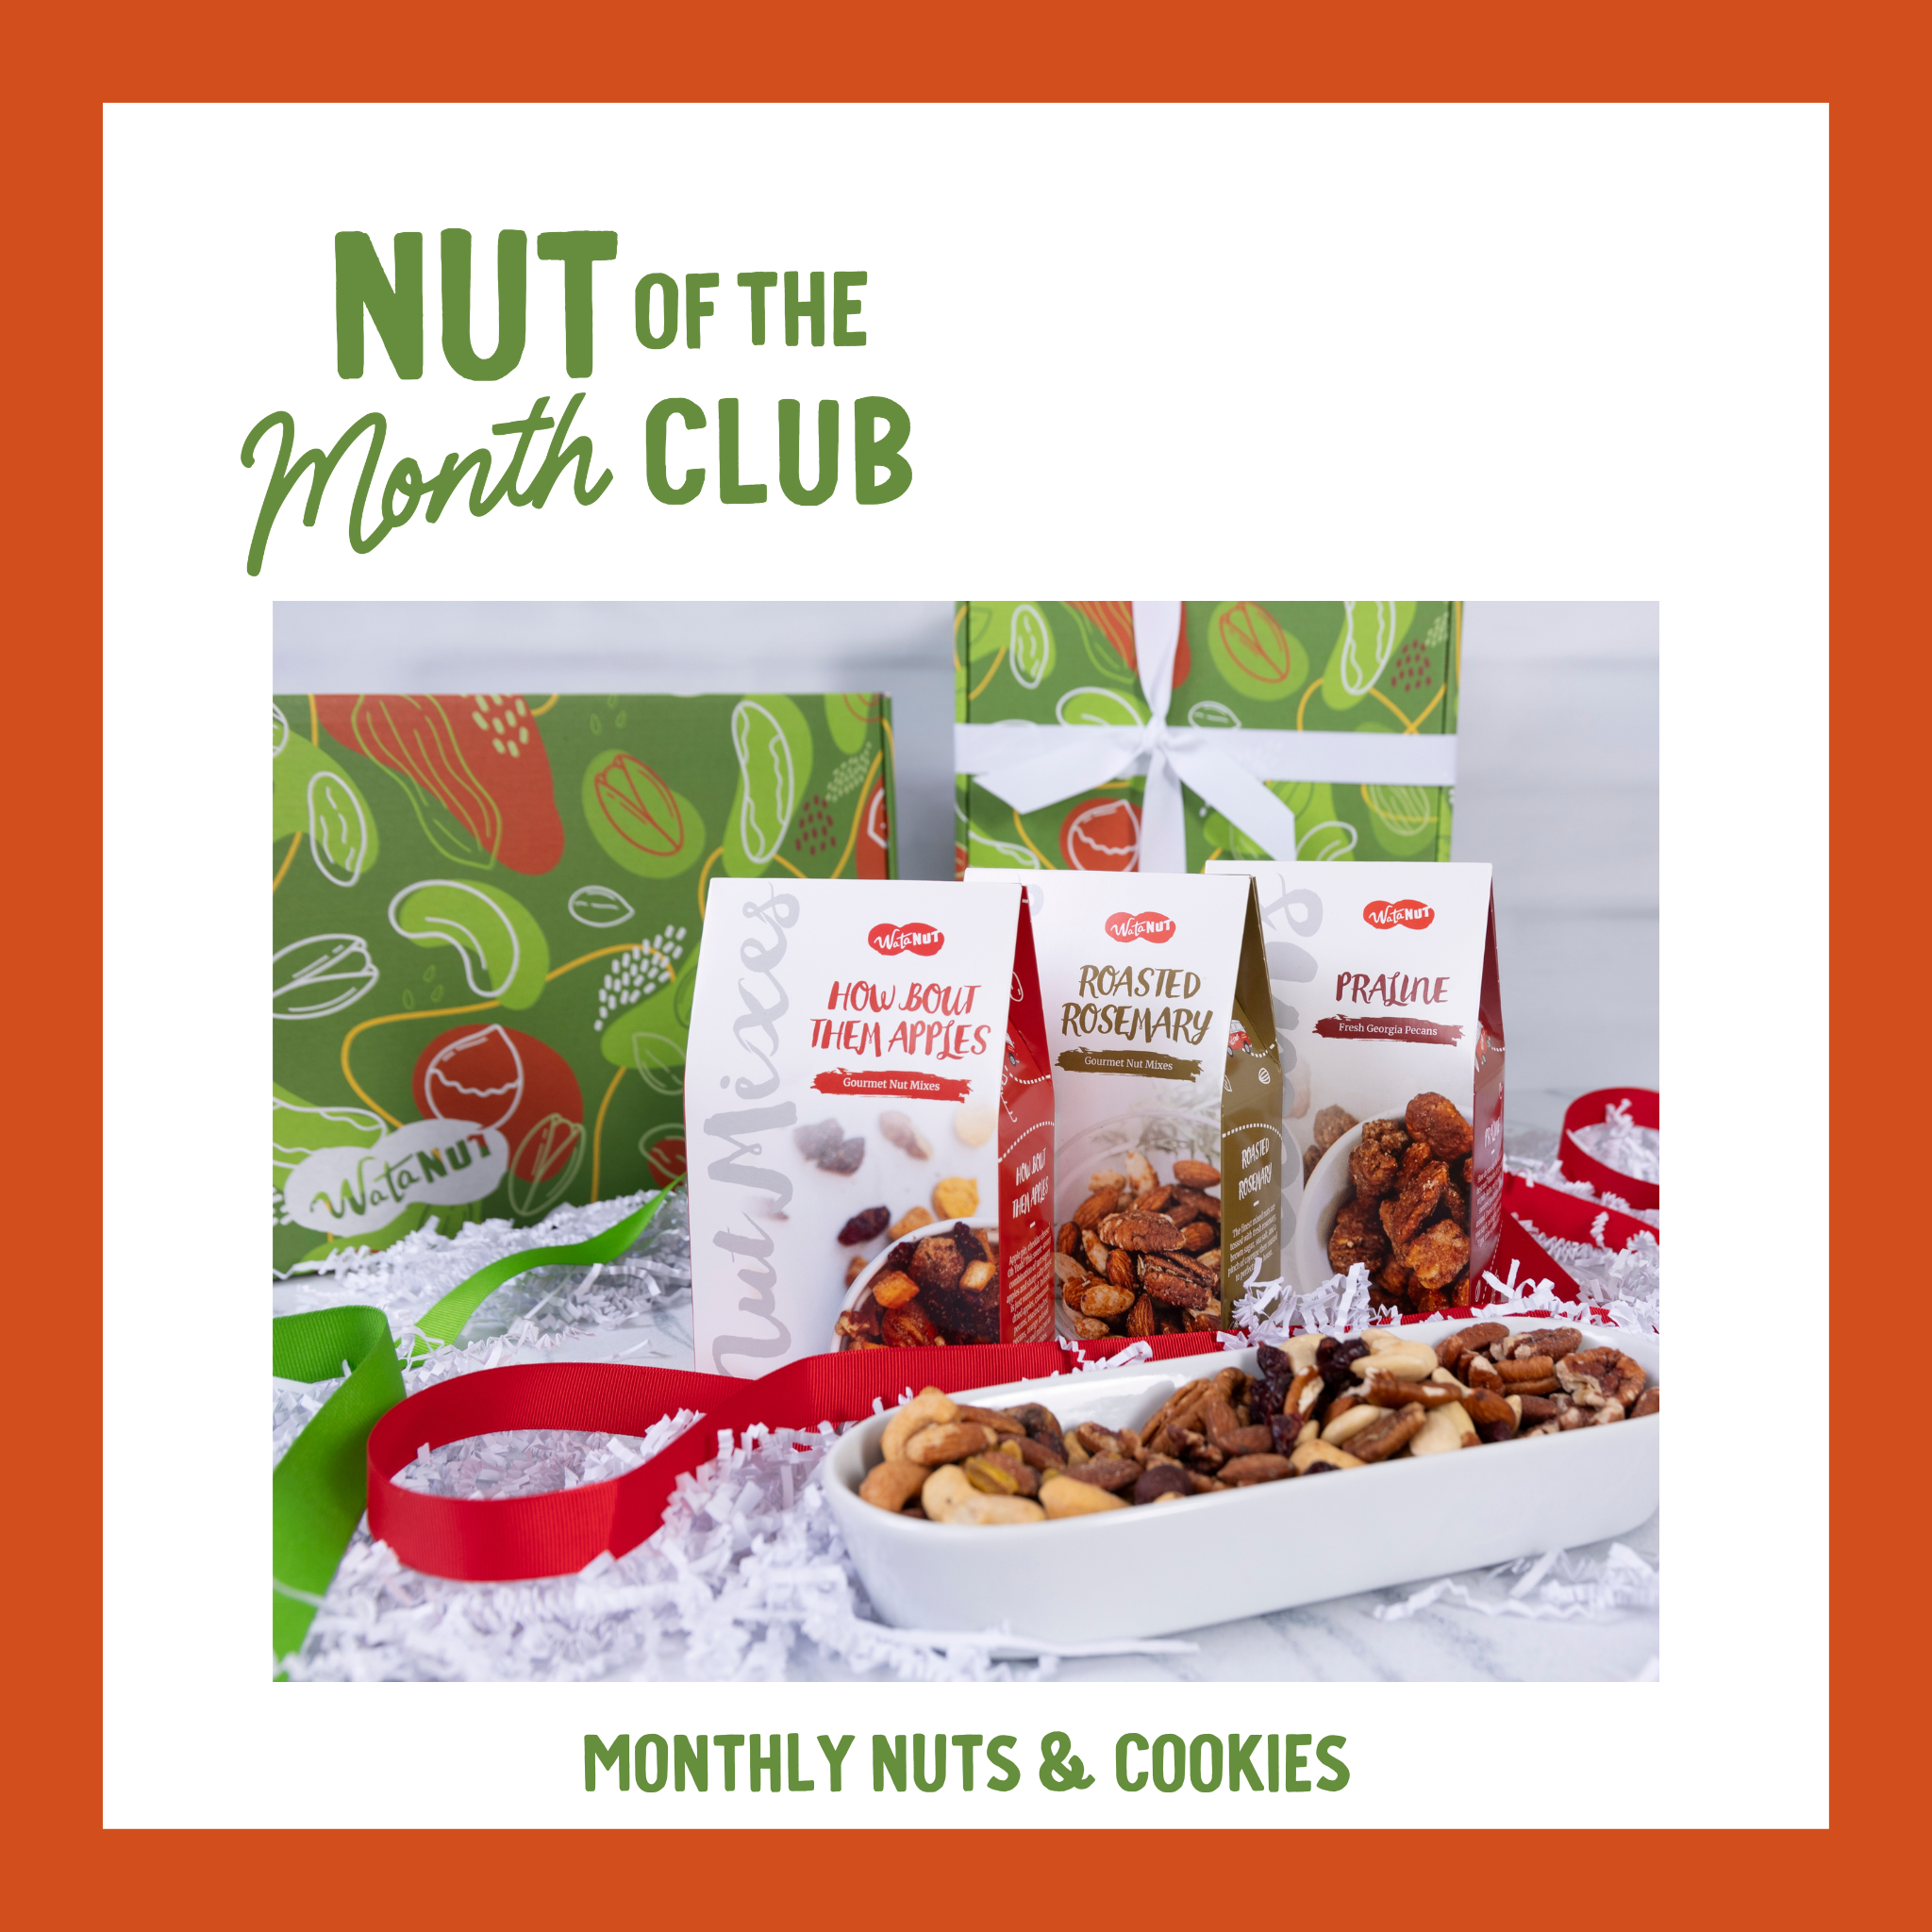 Monthly Box of Nuts & Cookies